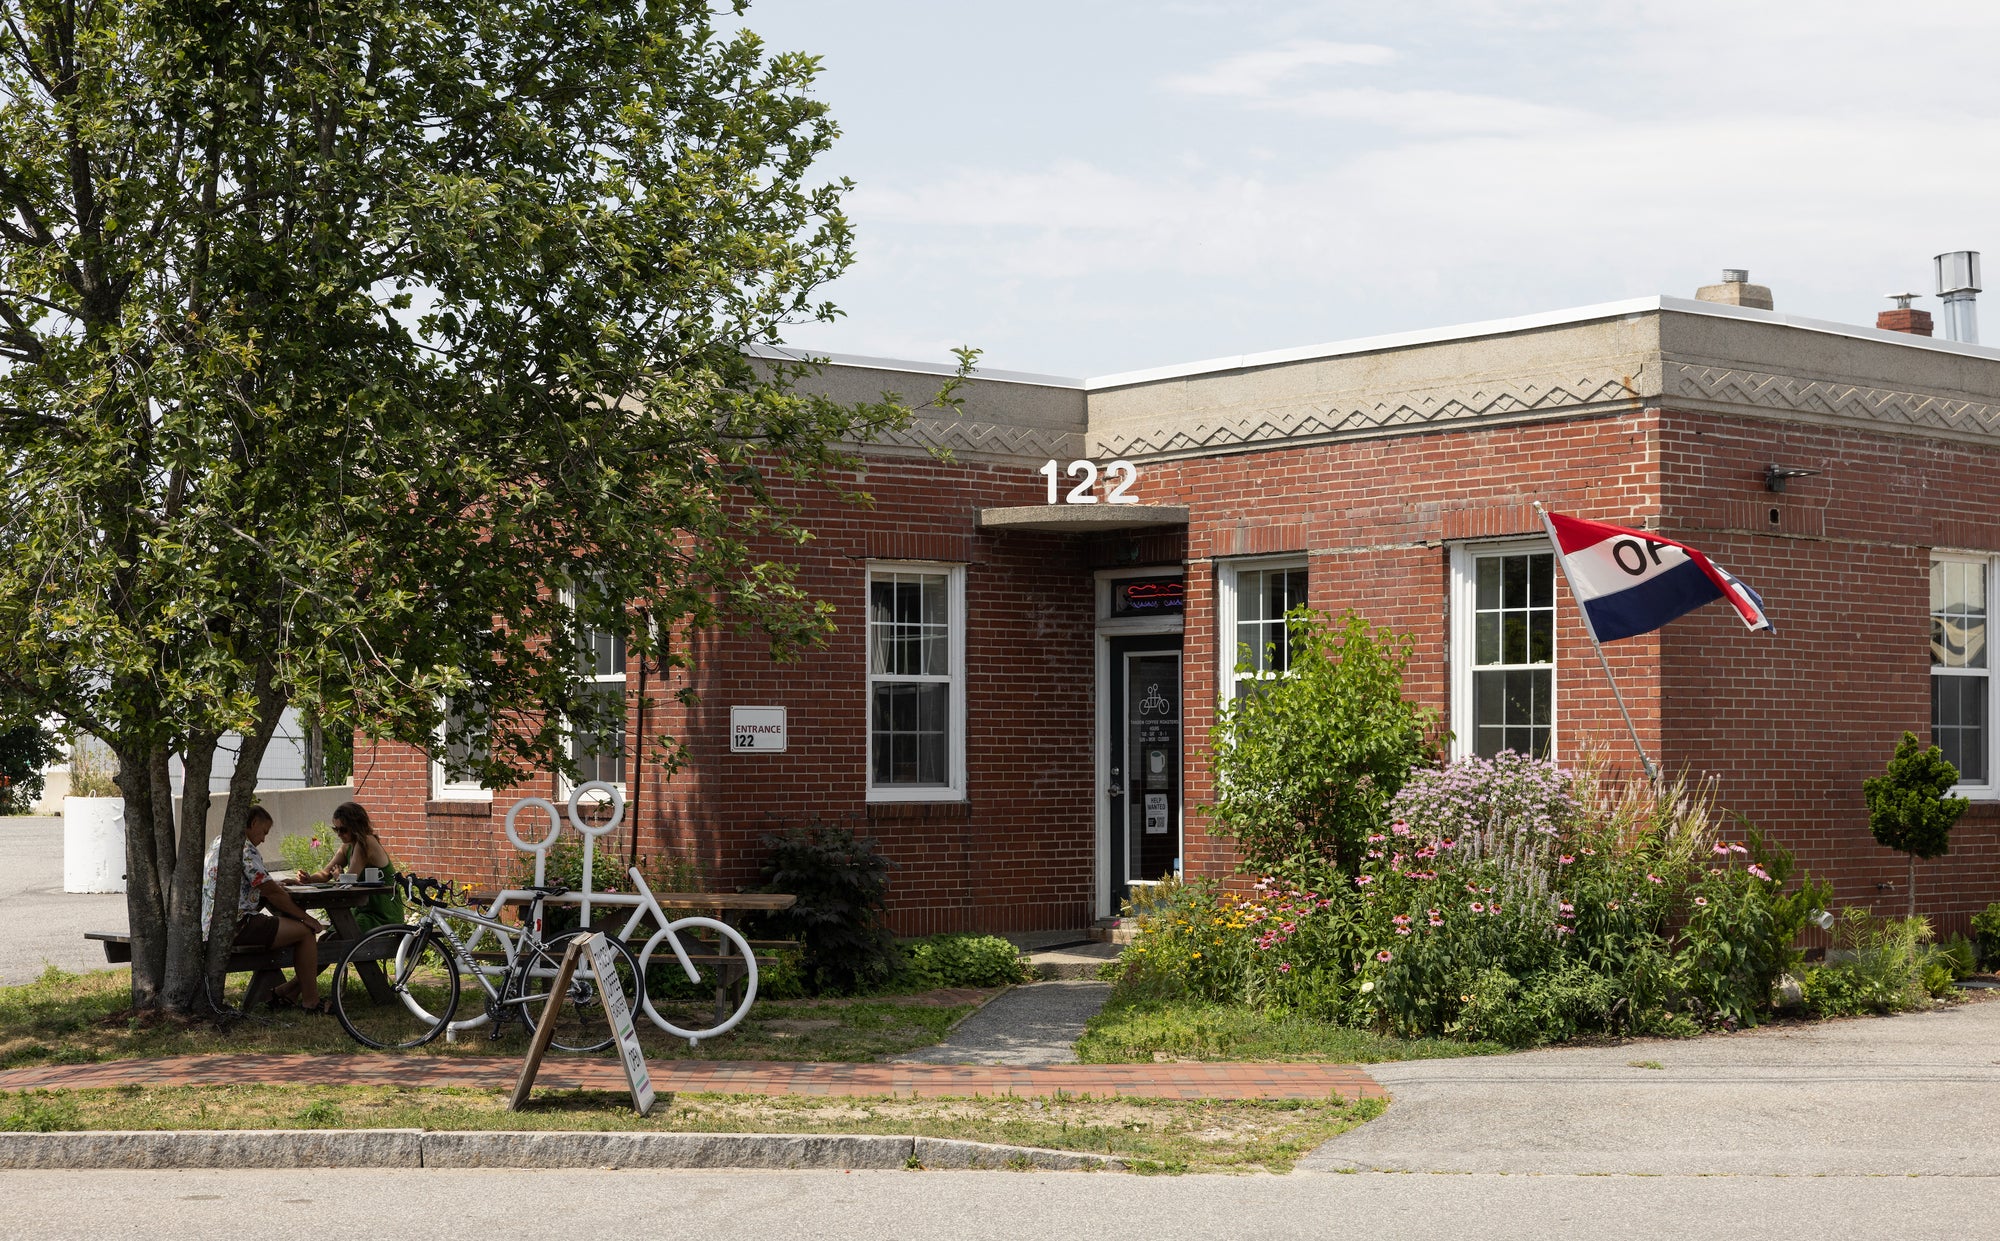 A quaint brick building with a patriotic flag, a bicycle sculpture in front, and a person seated at a table under a tree, likely enjoying a peaceful outdoor setting.